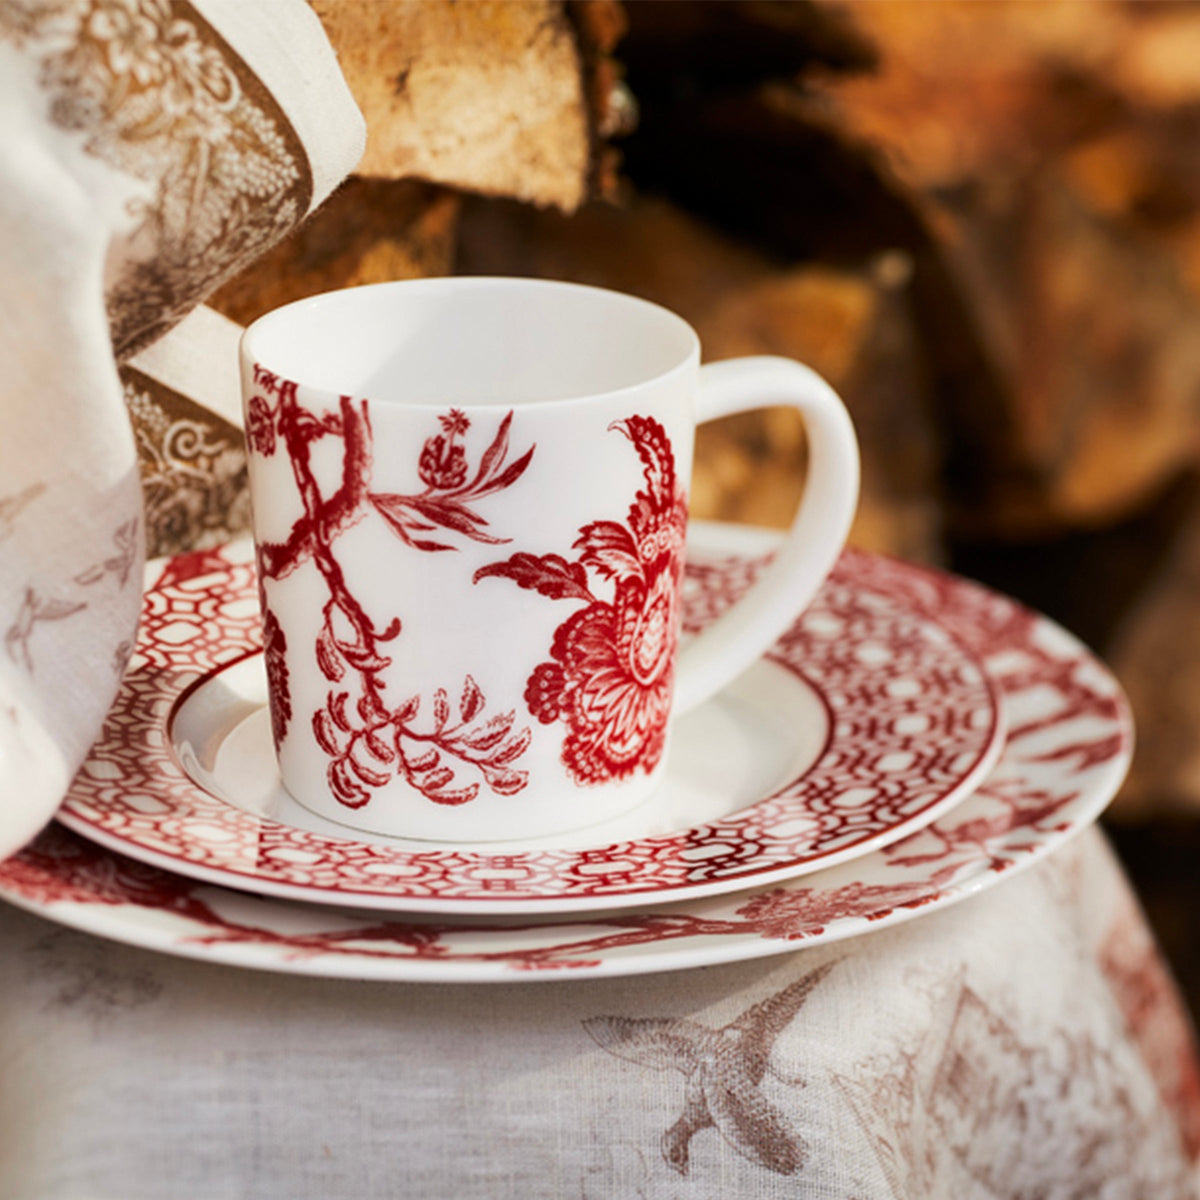 Arcadia Crimson Red and White Porcelain Mug from Caskata is seen here matched with a Crimson Newport Garden Gate salad plate and Arcadia Crimson dinner plate for an effortless and whimsical place setting. 